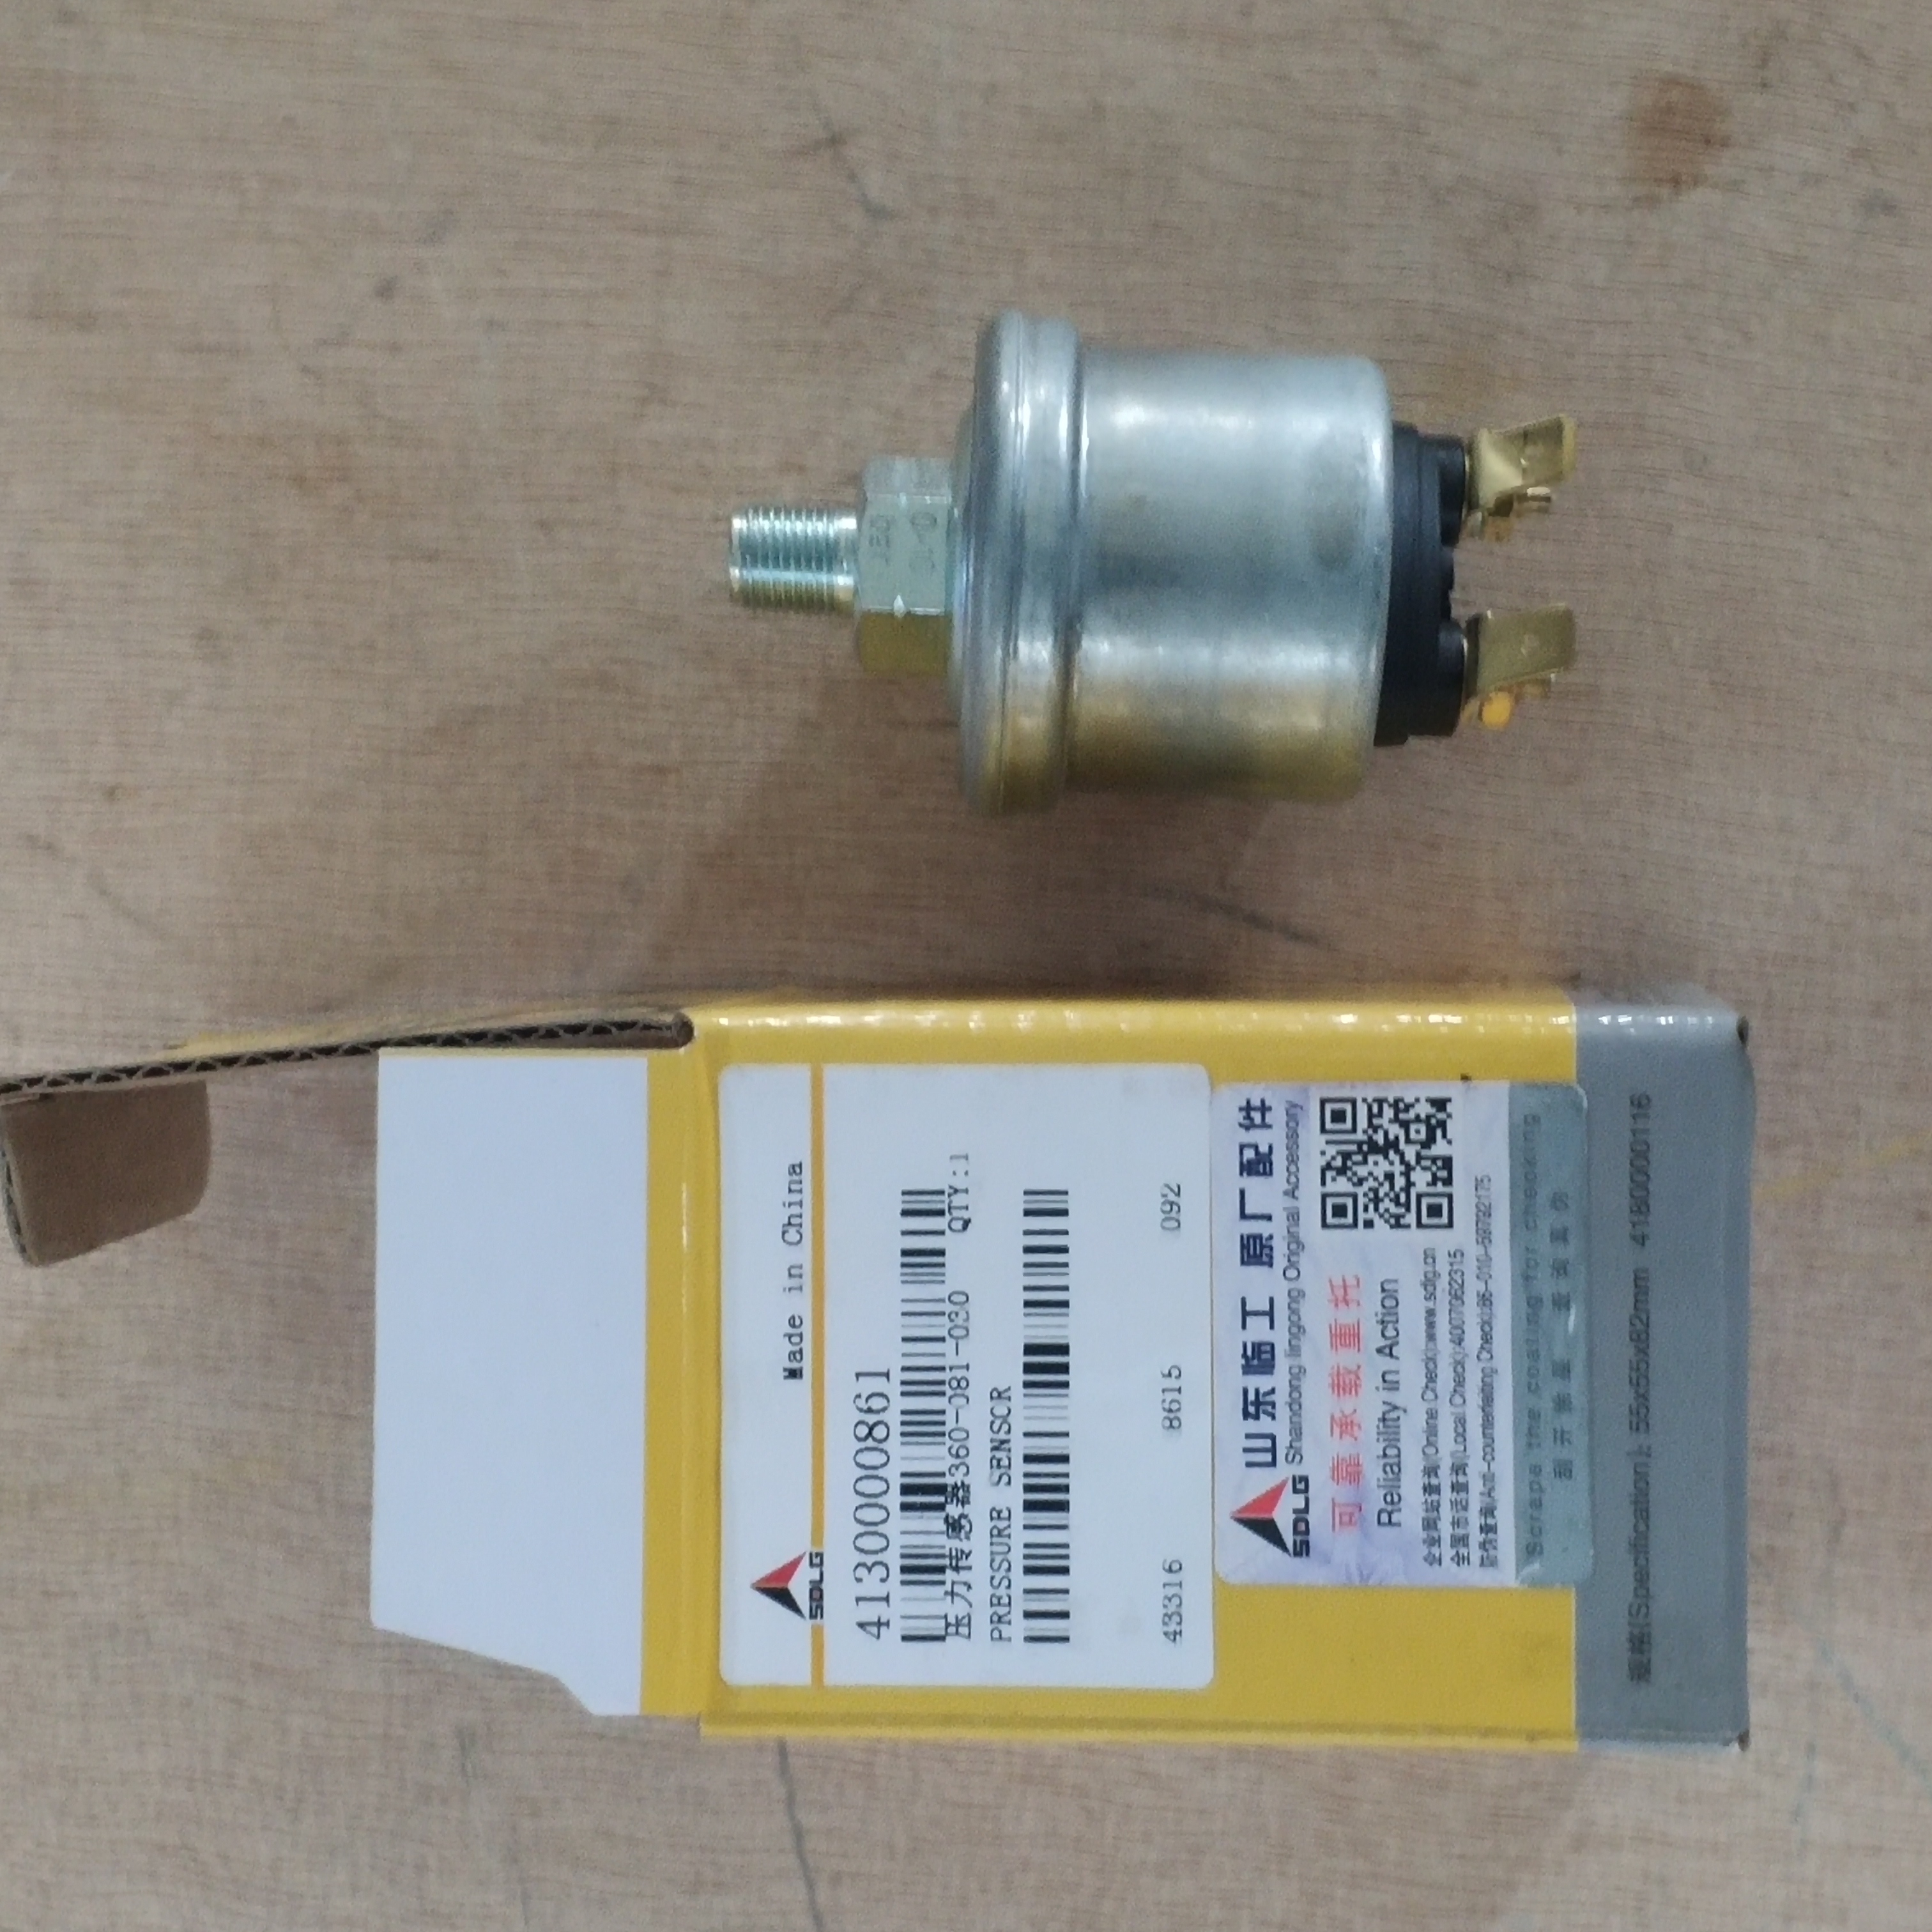 SDLG LG936L Panel Assembly Spare Parts 4130000861 360-081-030-100 PRESSURE TRANSDUCER